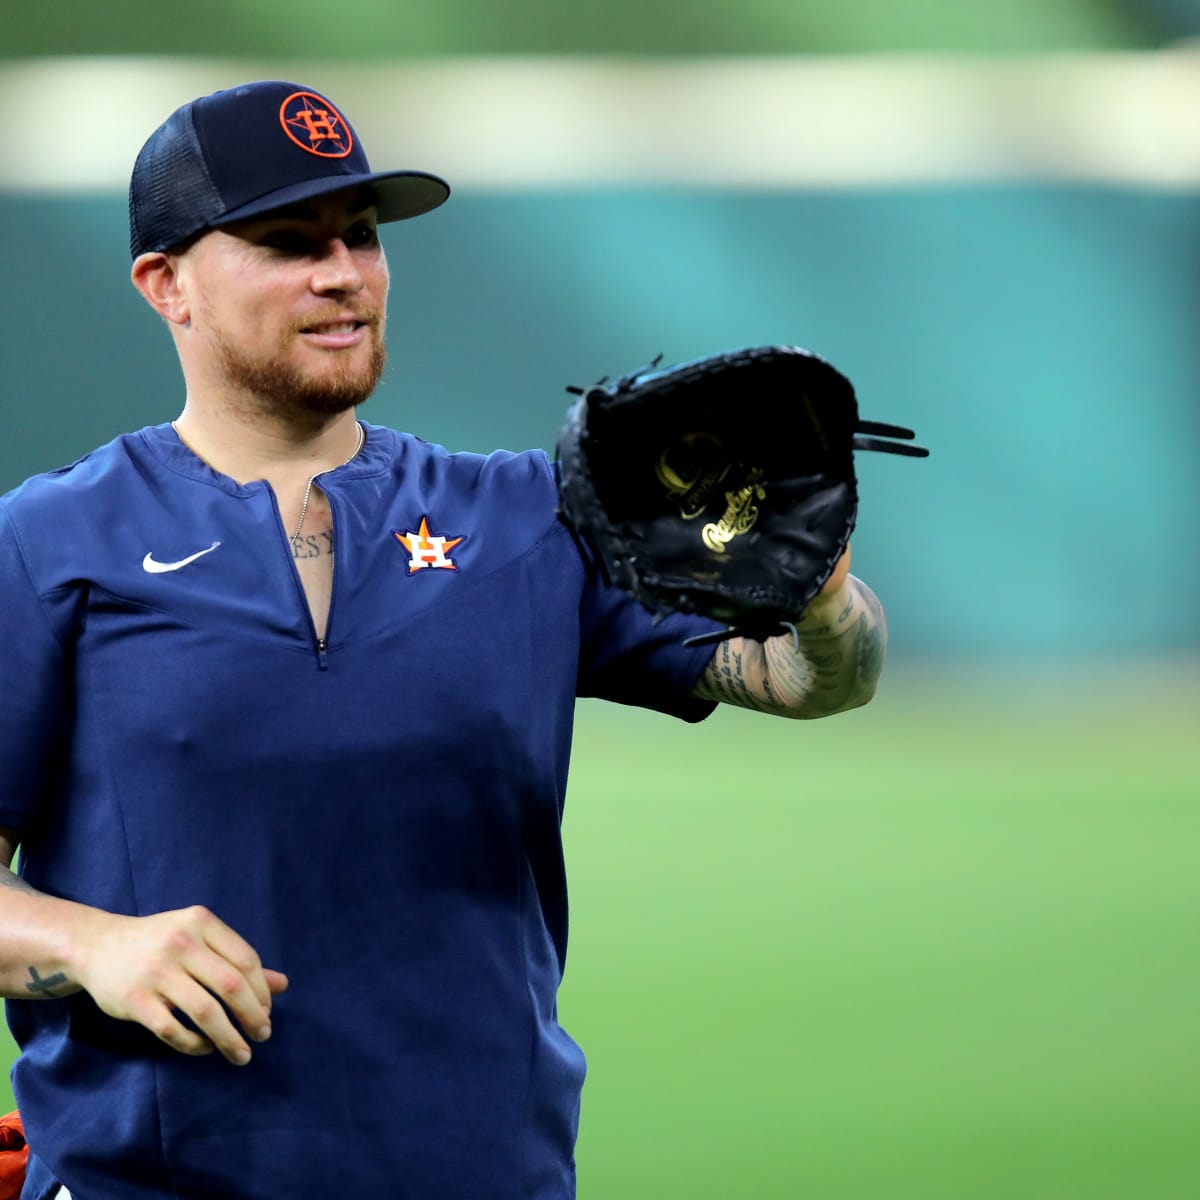 Christian Vazquez catching on, National Sports